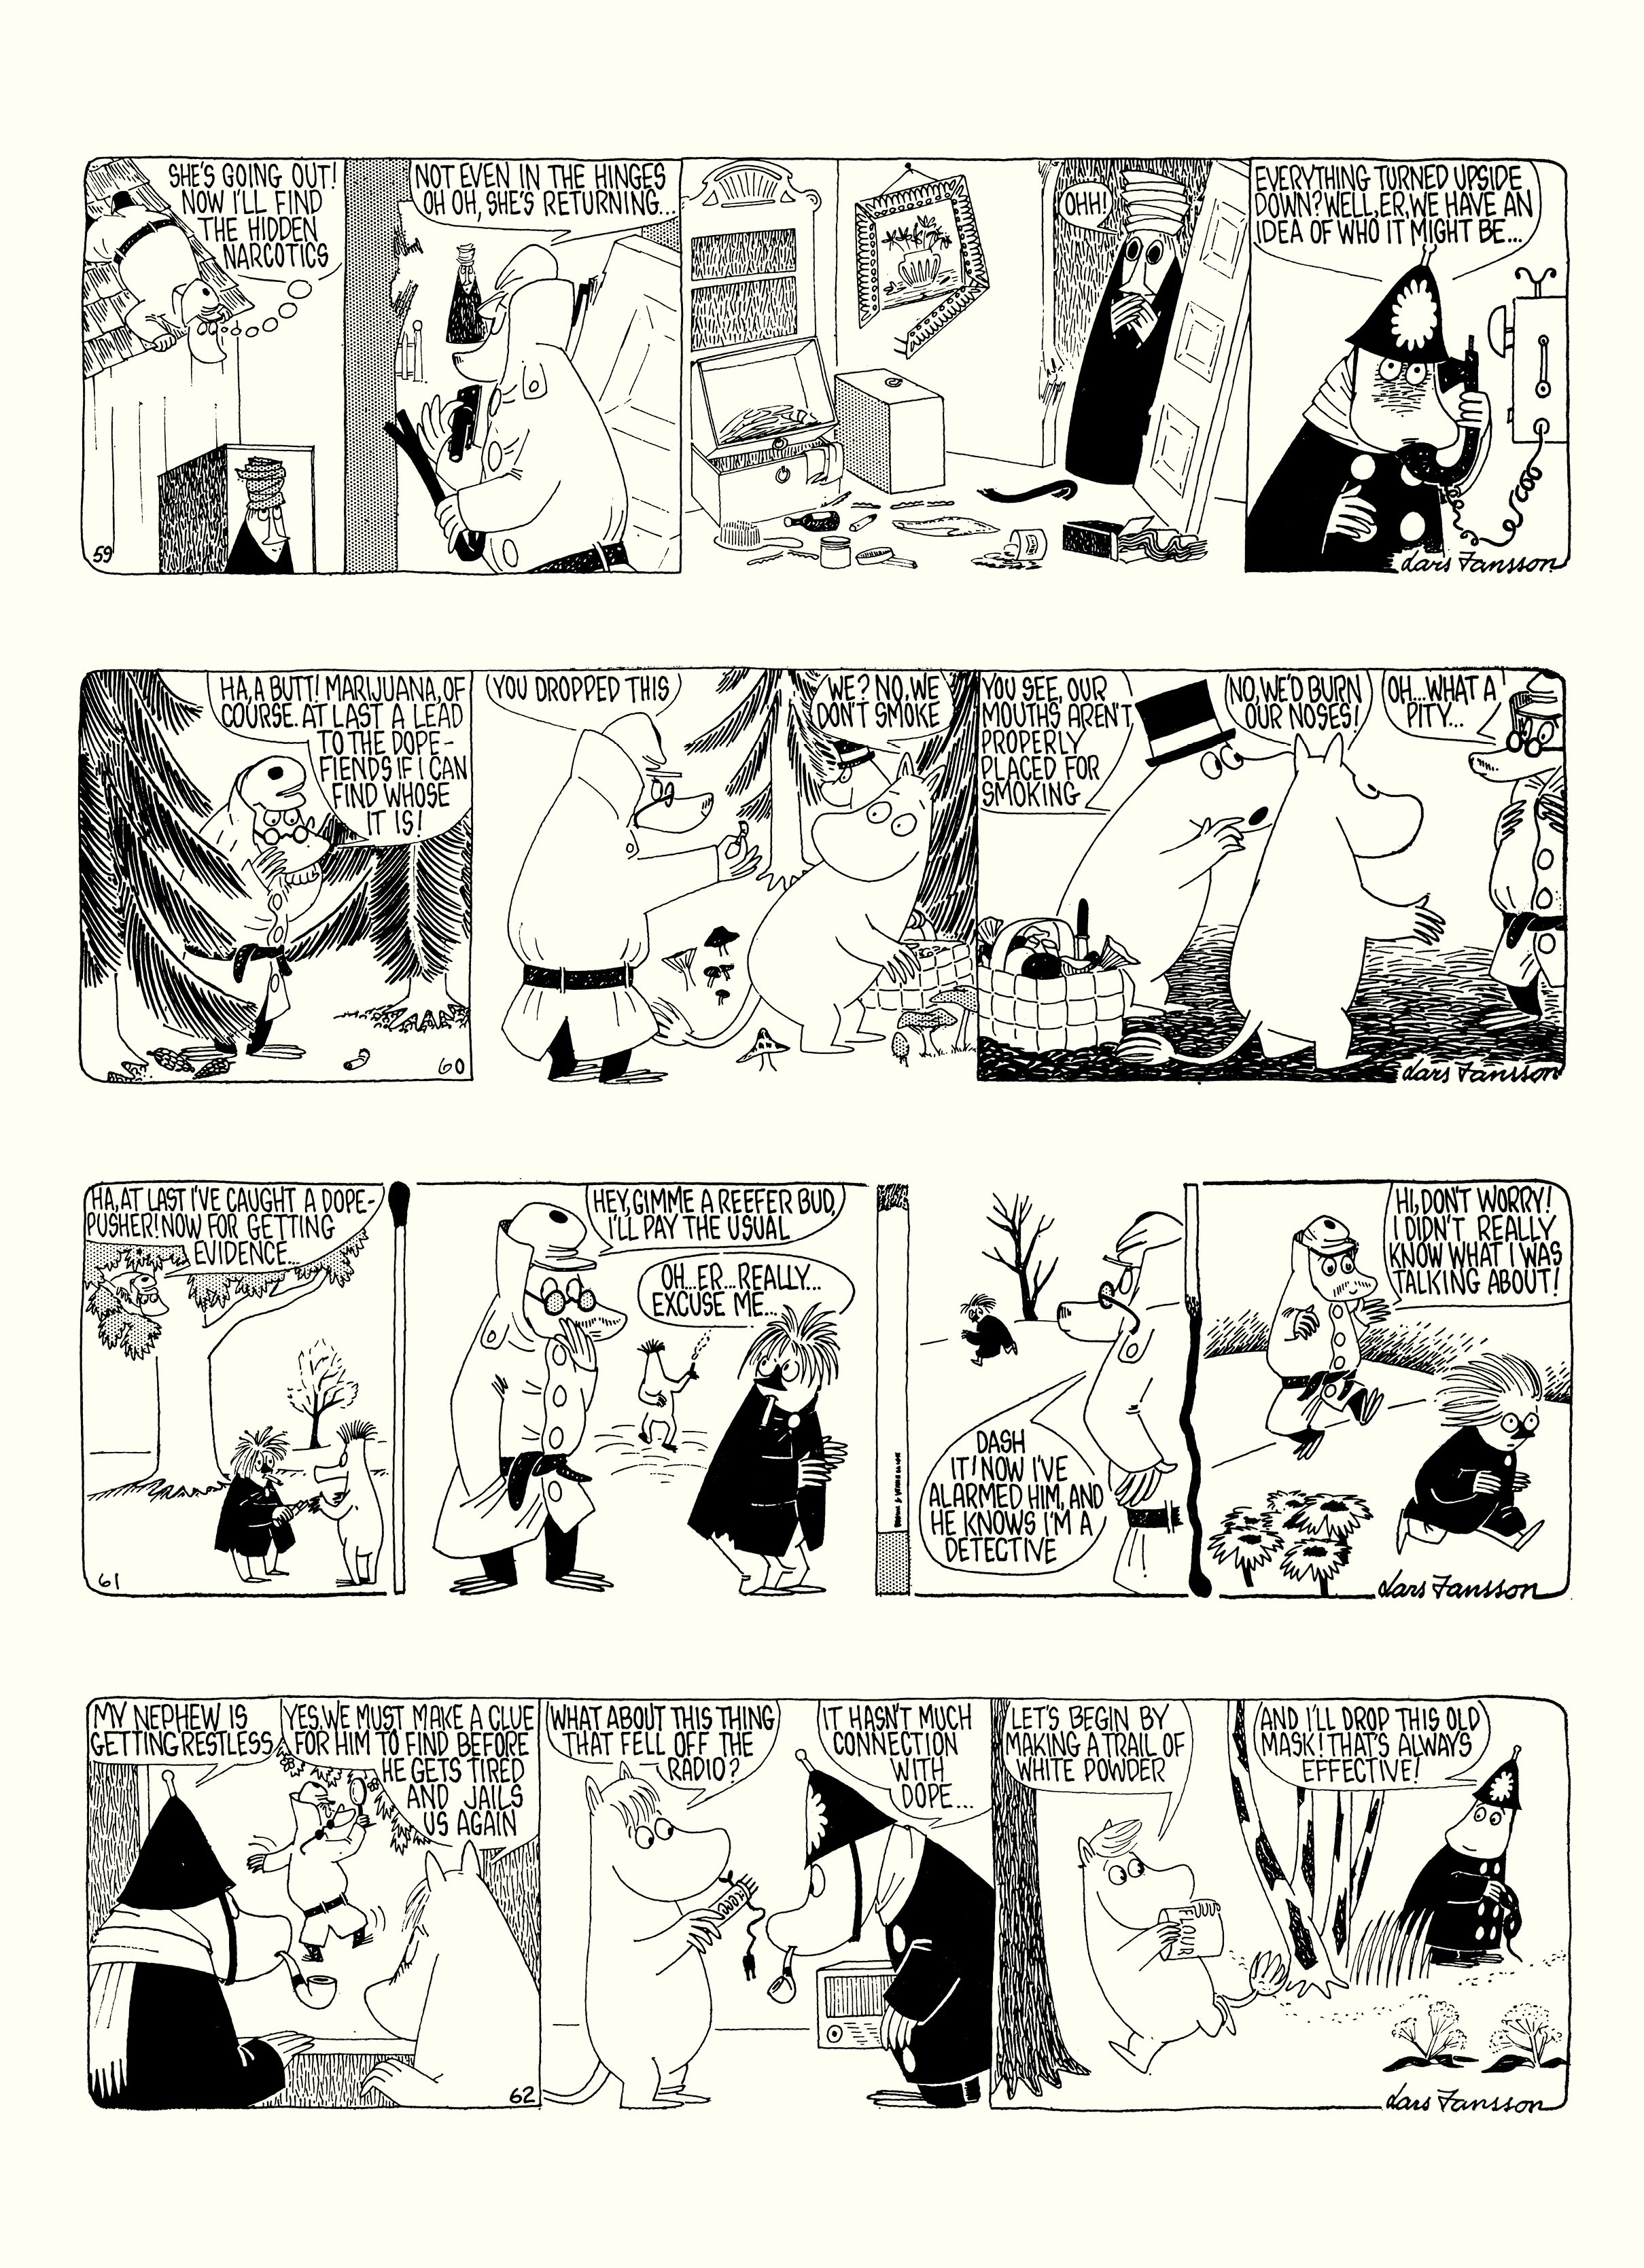 Read online Moomin: The Complete Lars Jansson Comic Strip comic -  Issue # TPB 8 - 86